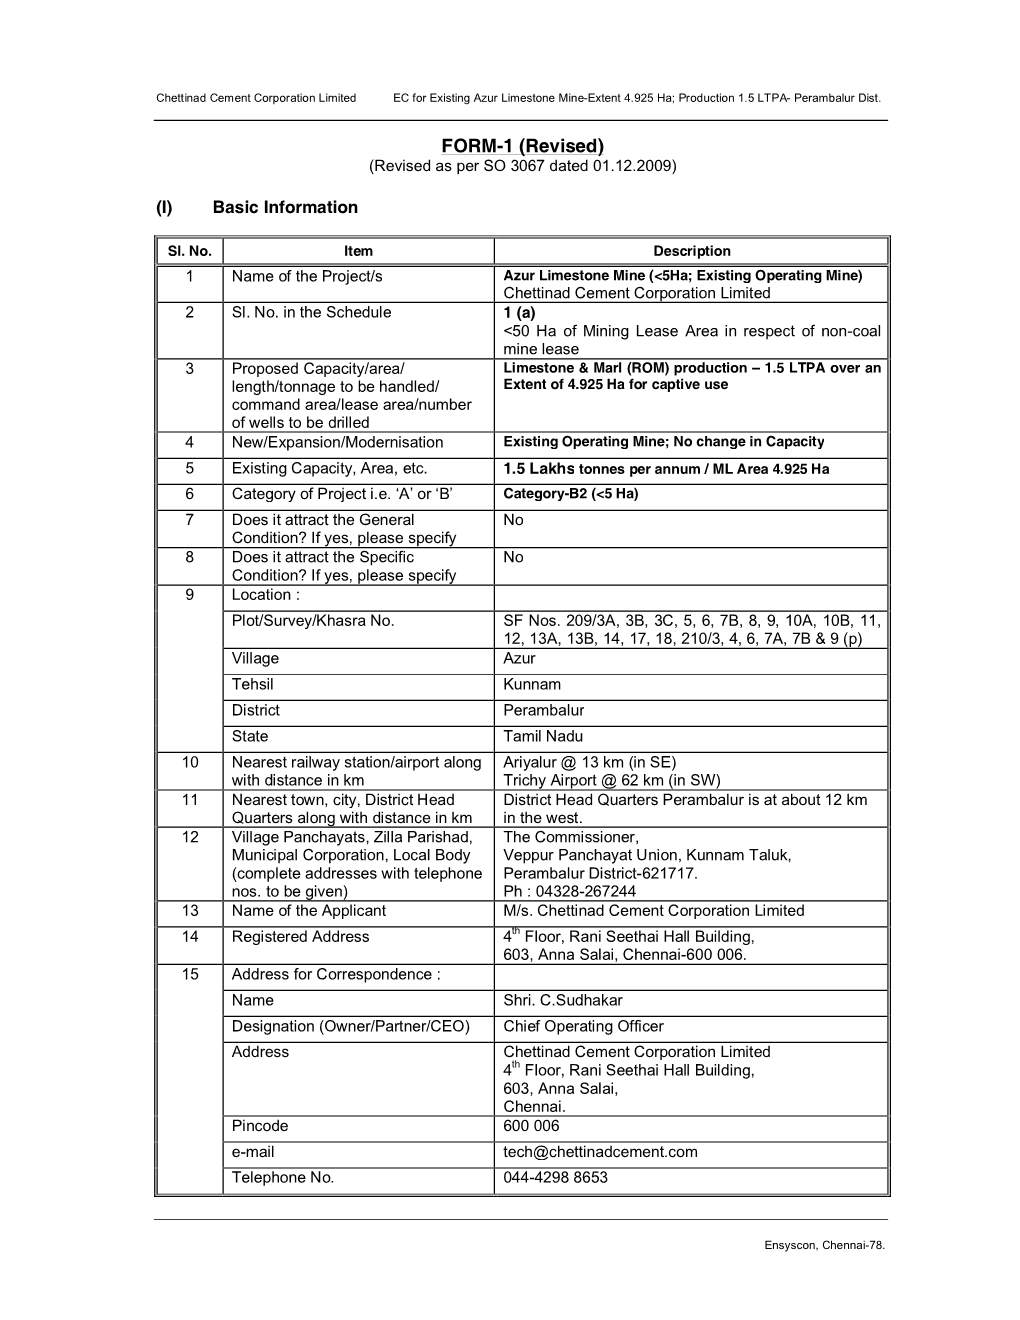 FORM-1 (Revised) (Revised As Per SO 3067 Dated 01.12.2009)